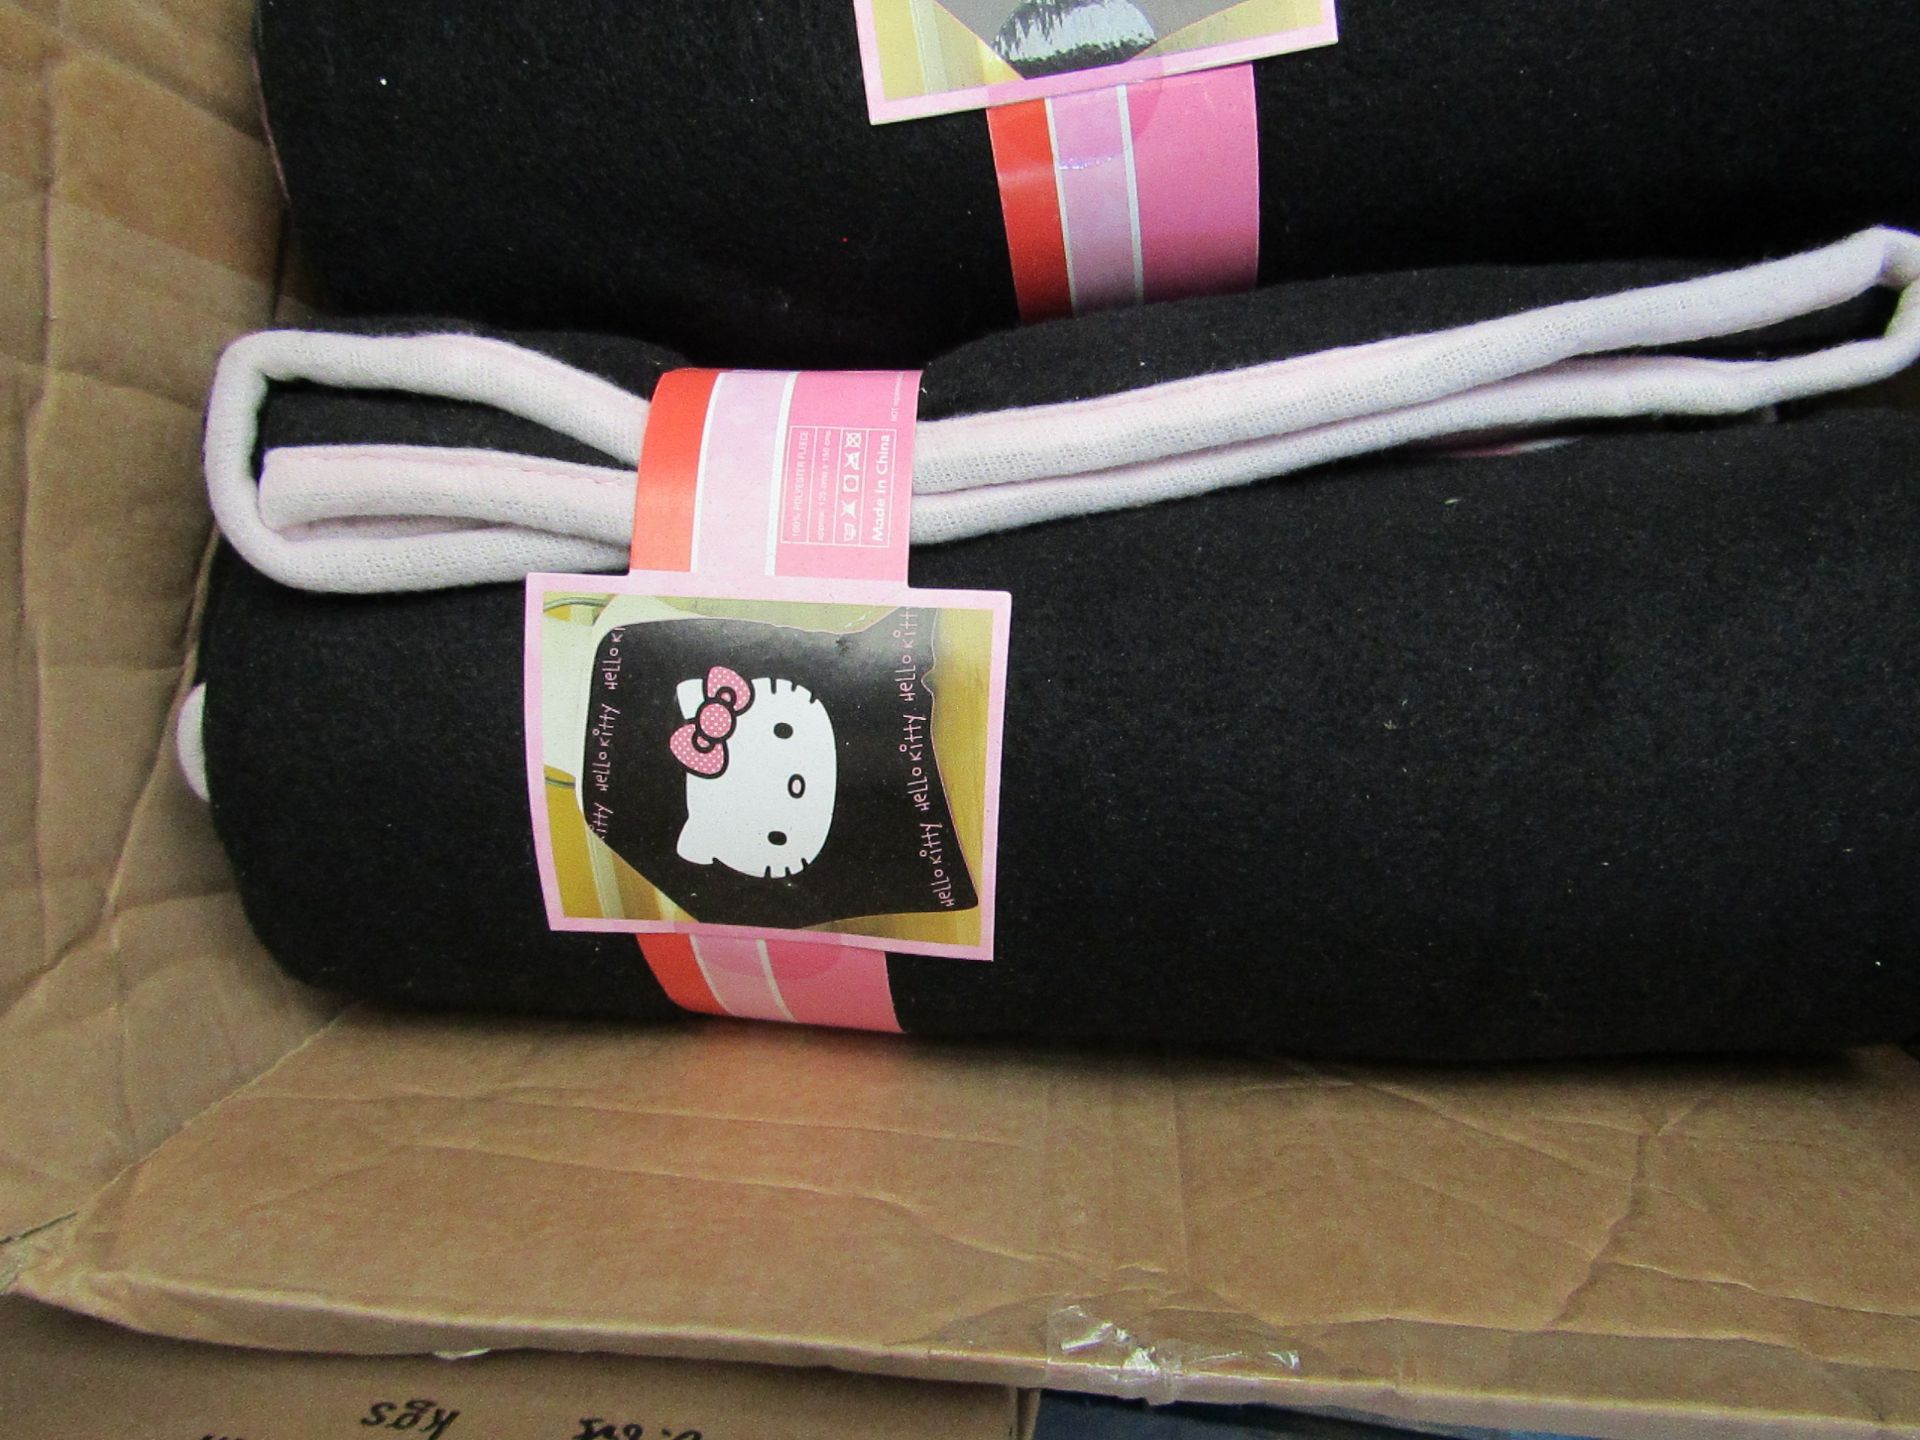 Hello Kitty fleece blanket, new and packaged.